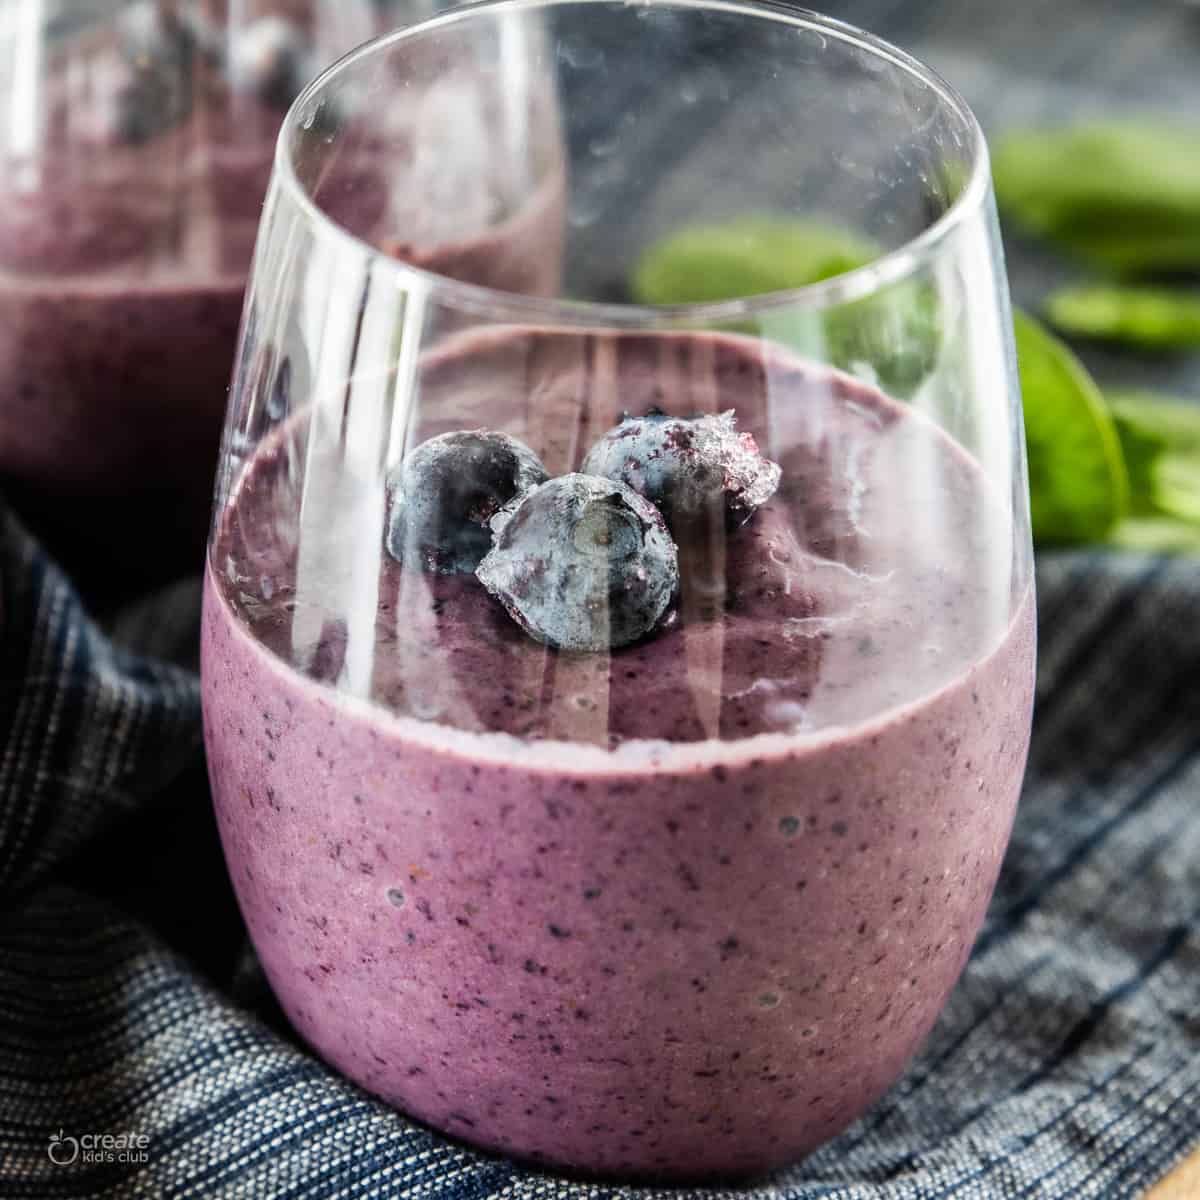 A high fiber blueberry spinach smoothie in a clear serving glass.